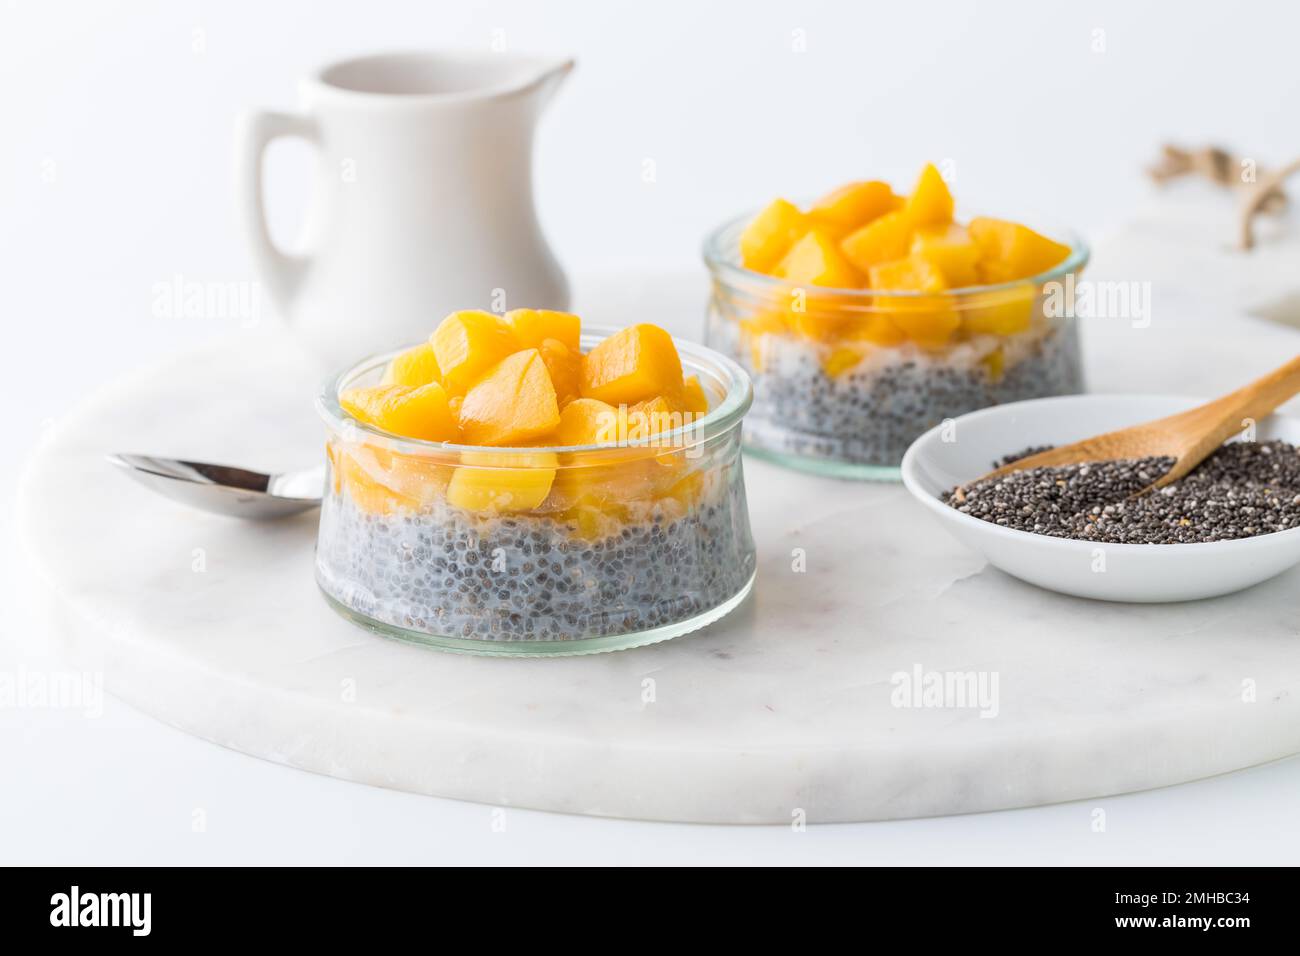 Chia pudding parfaits topped with chopped mango pieces, ready for eating. Stock Photo